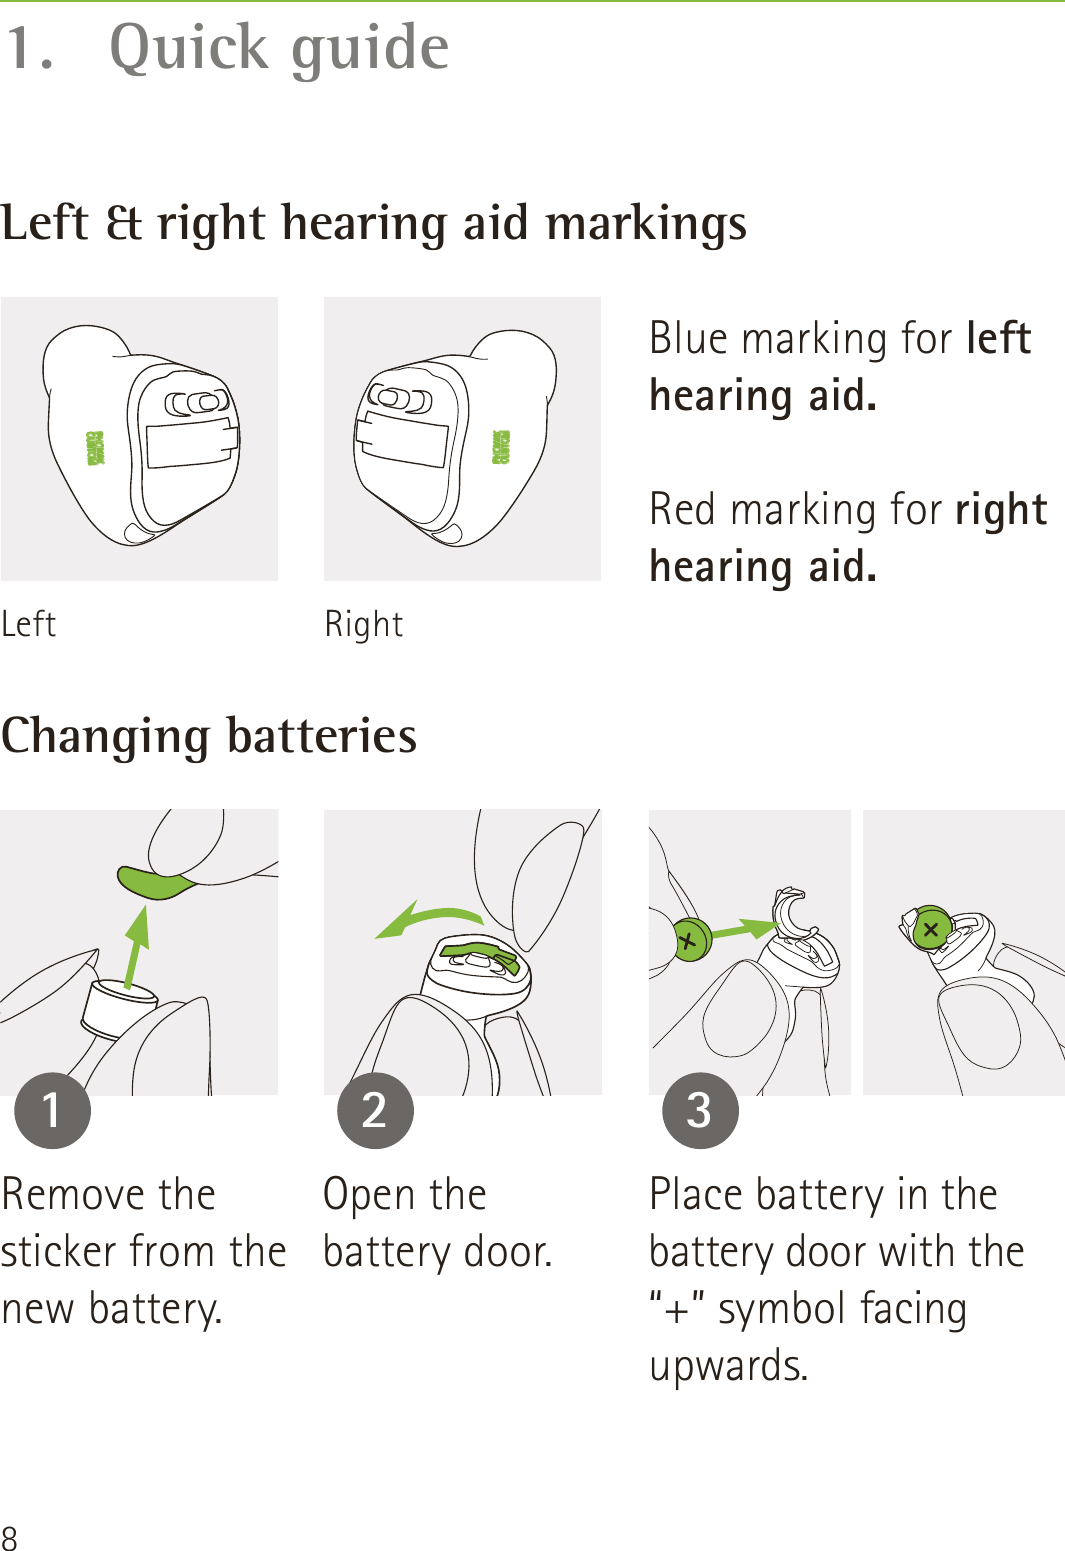 81. Quick guideLeft &amp; right hearing aid markingsChanging batteriesBlue marking for left hearing aid.Red marking for right hearing aid.Remove the sticker from the new battery.Left RightOpen the  battery door.Place battery in the battery door with the “+” symbol facing upwards.1 2 3